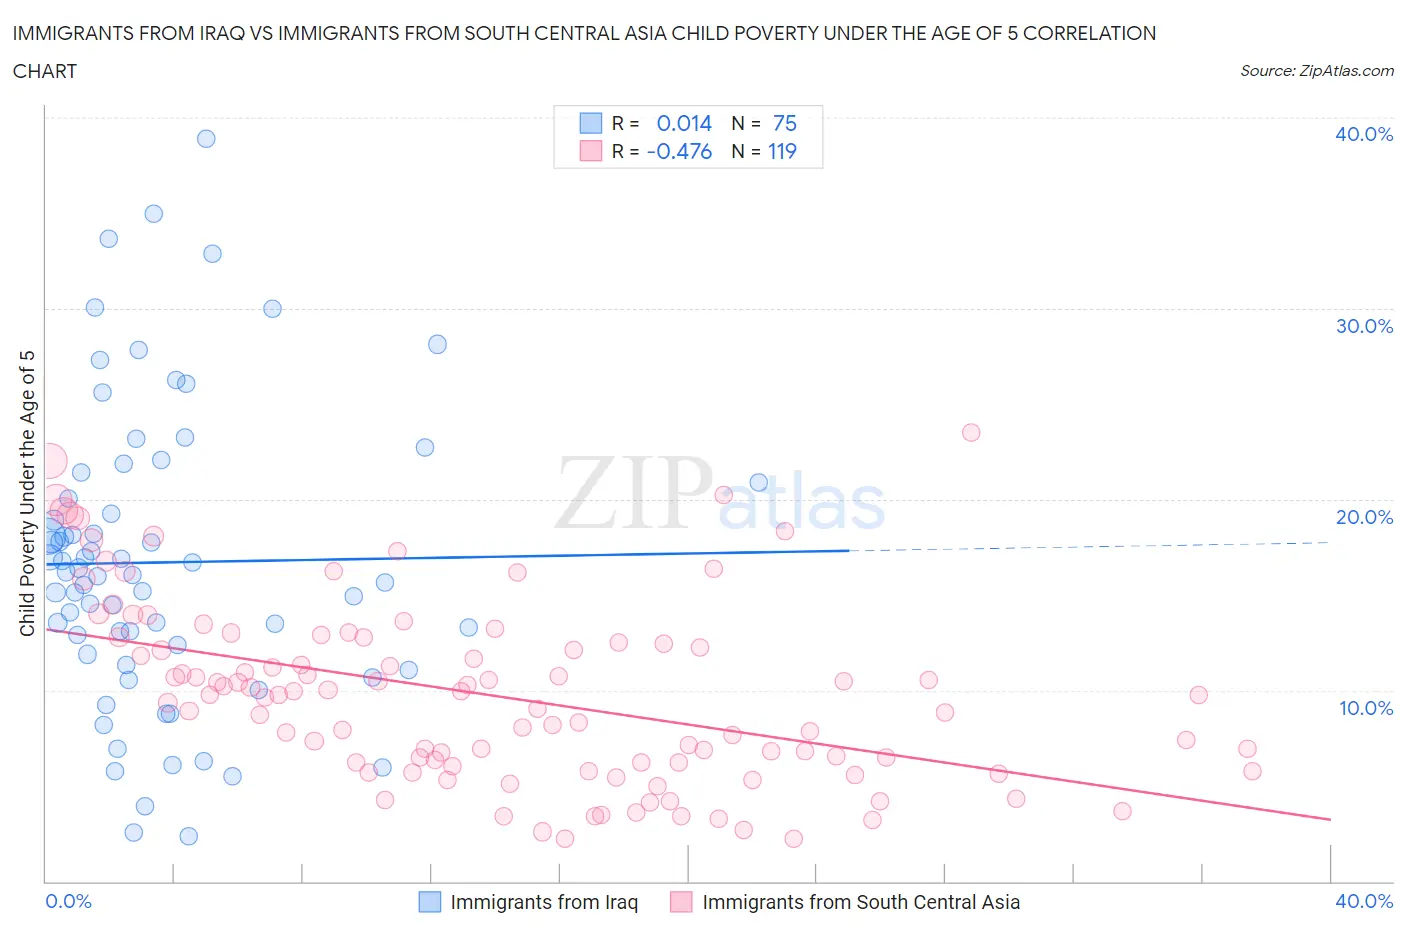 Immigrants from Iraq vs Immigrants from South Central Asia Child Poverty Under the Age of 5